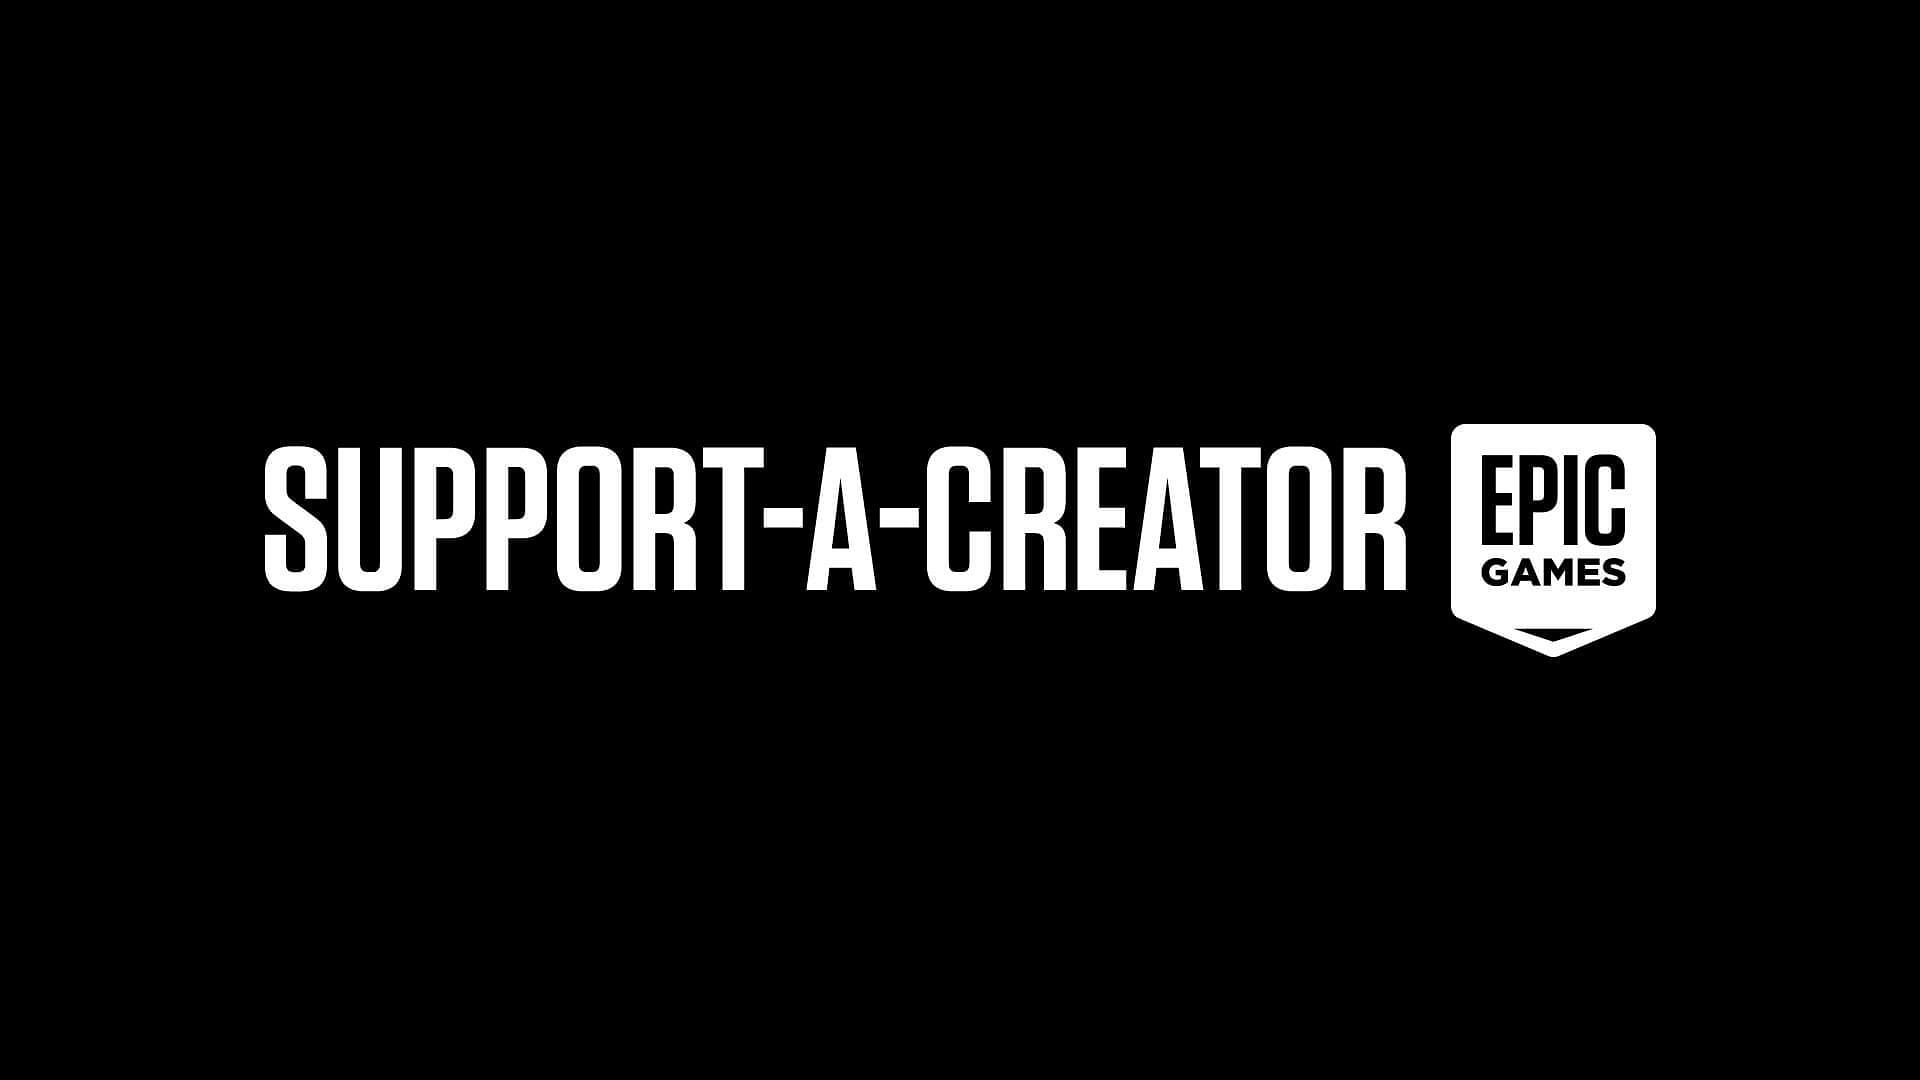 Fortnite players can now easily join the Support-A-Creator program (Image via Epic Games)